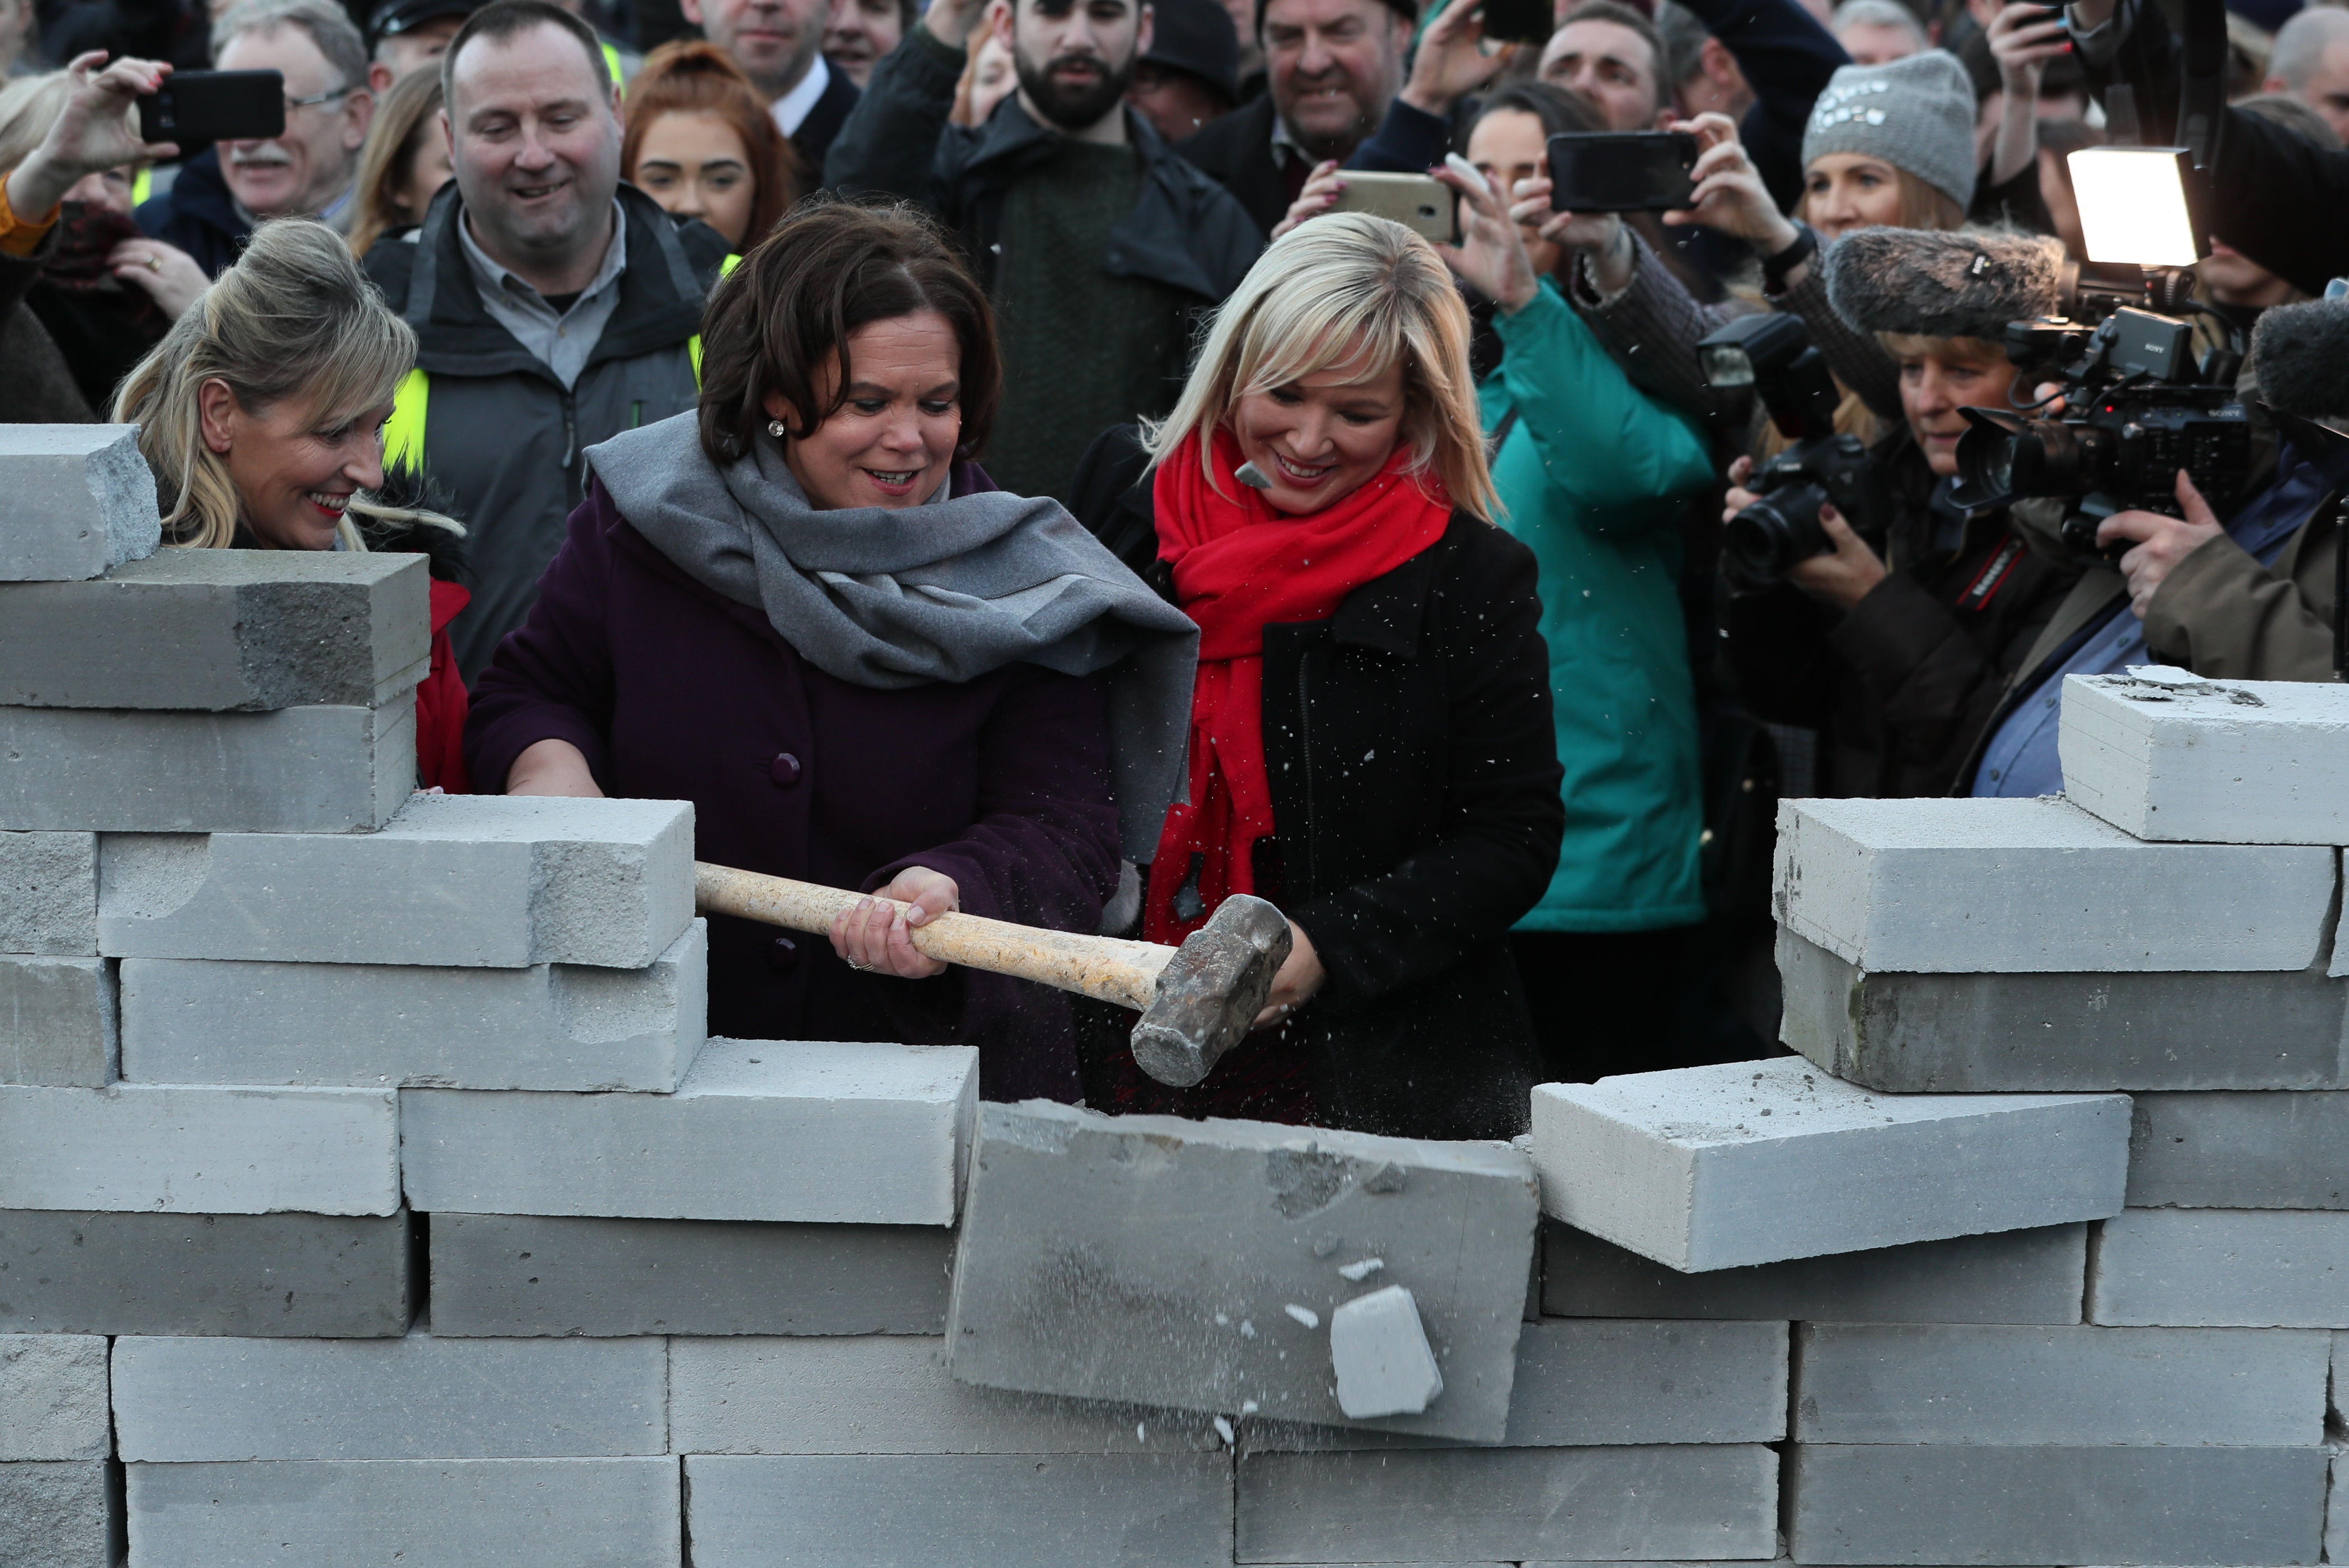 Sinn Fein leader Mary Lou McDonald and deputy leader Michelle O’Neill knock down a symbolic wall that was built as part of an anti-Brexit rally at the Irish border near Carrickcarnan, Co Louth (Brian Lawless/PA)